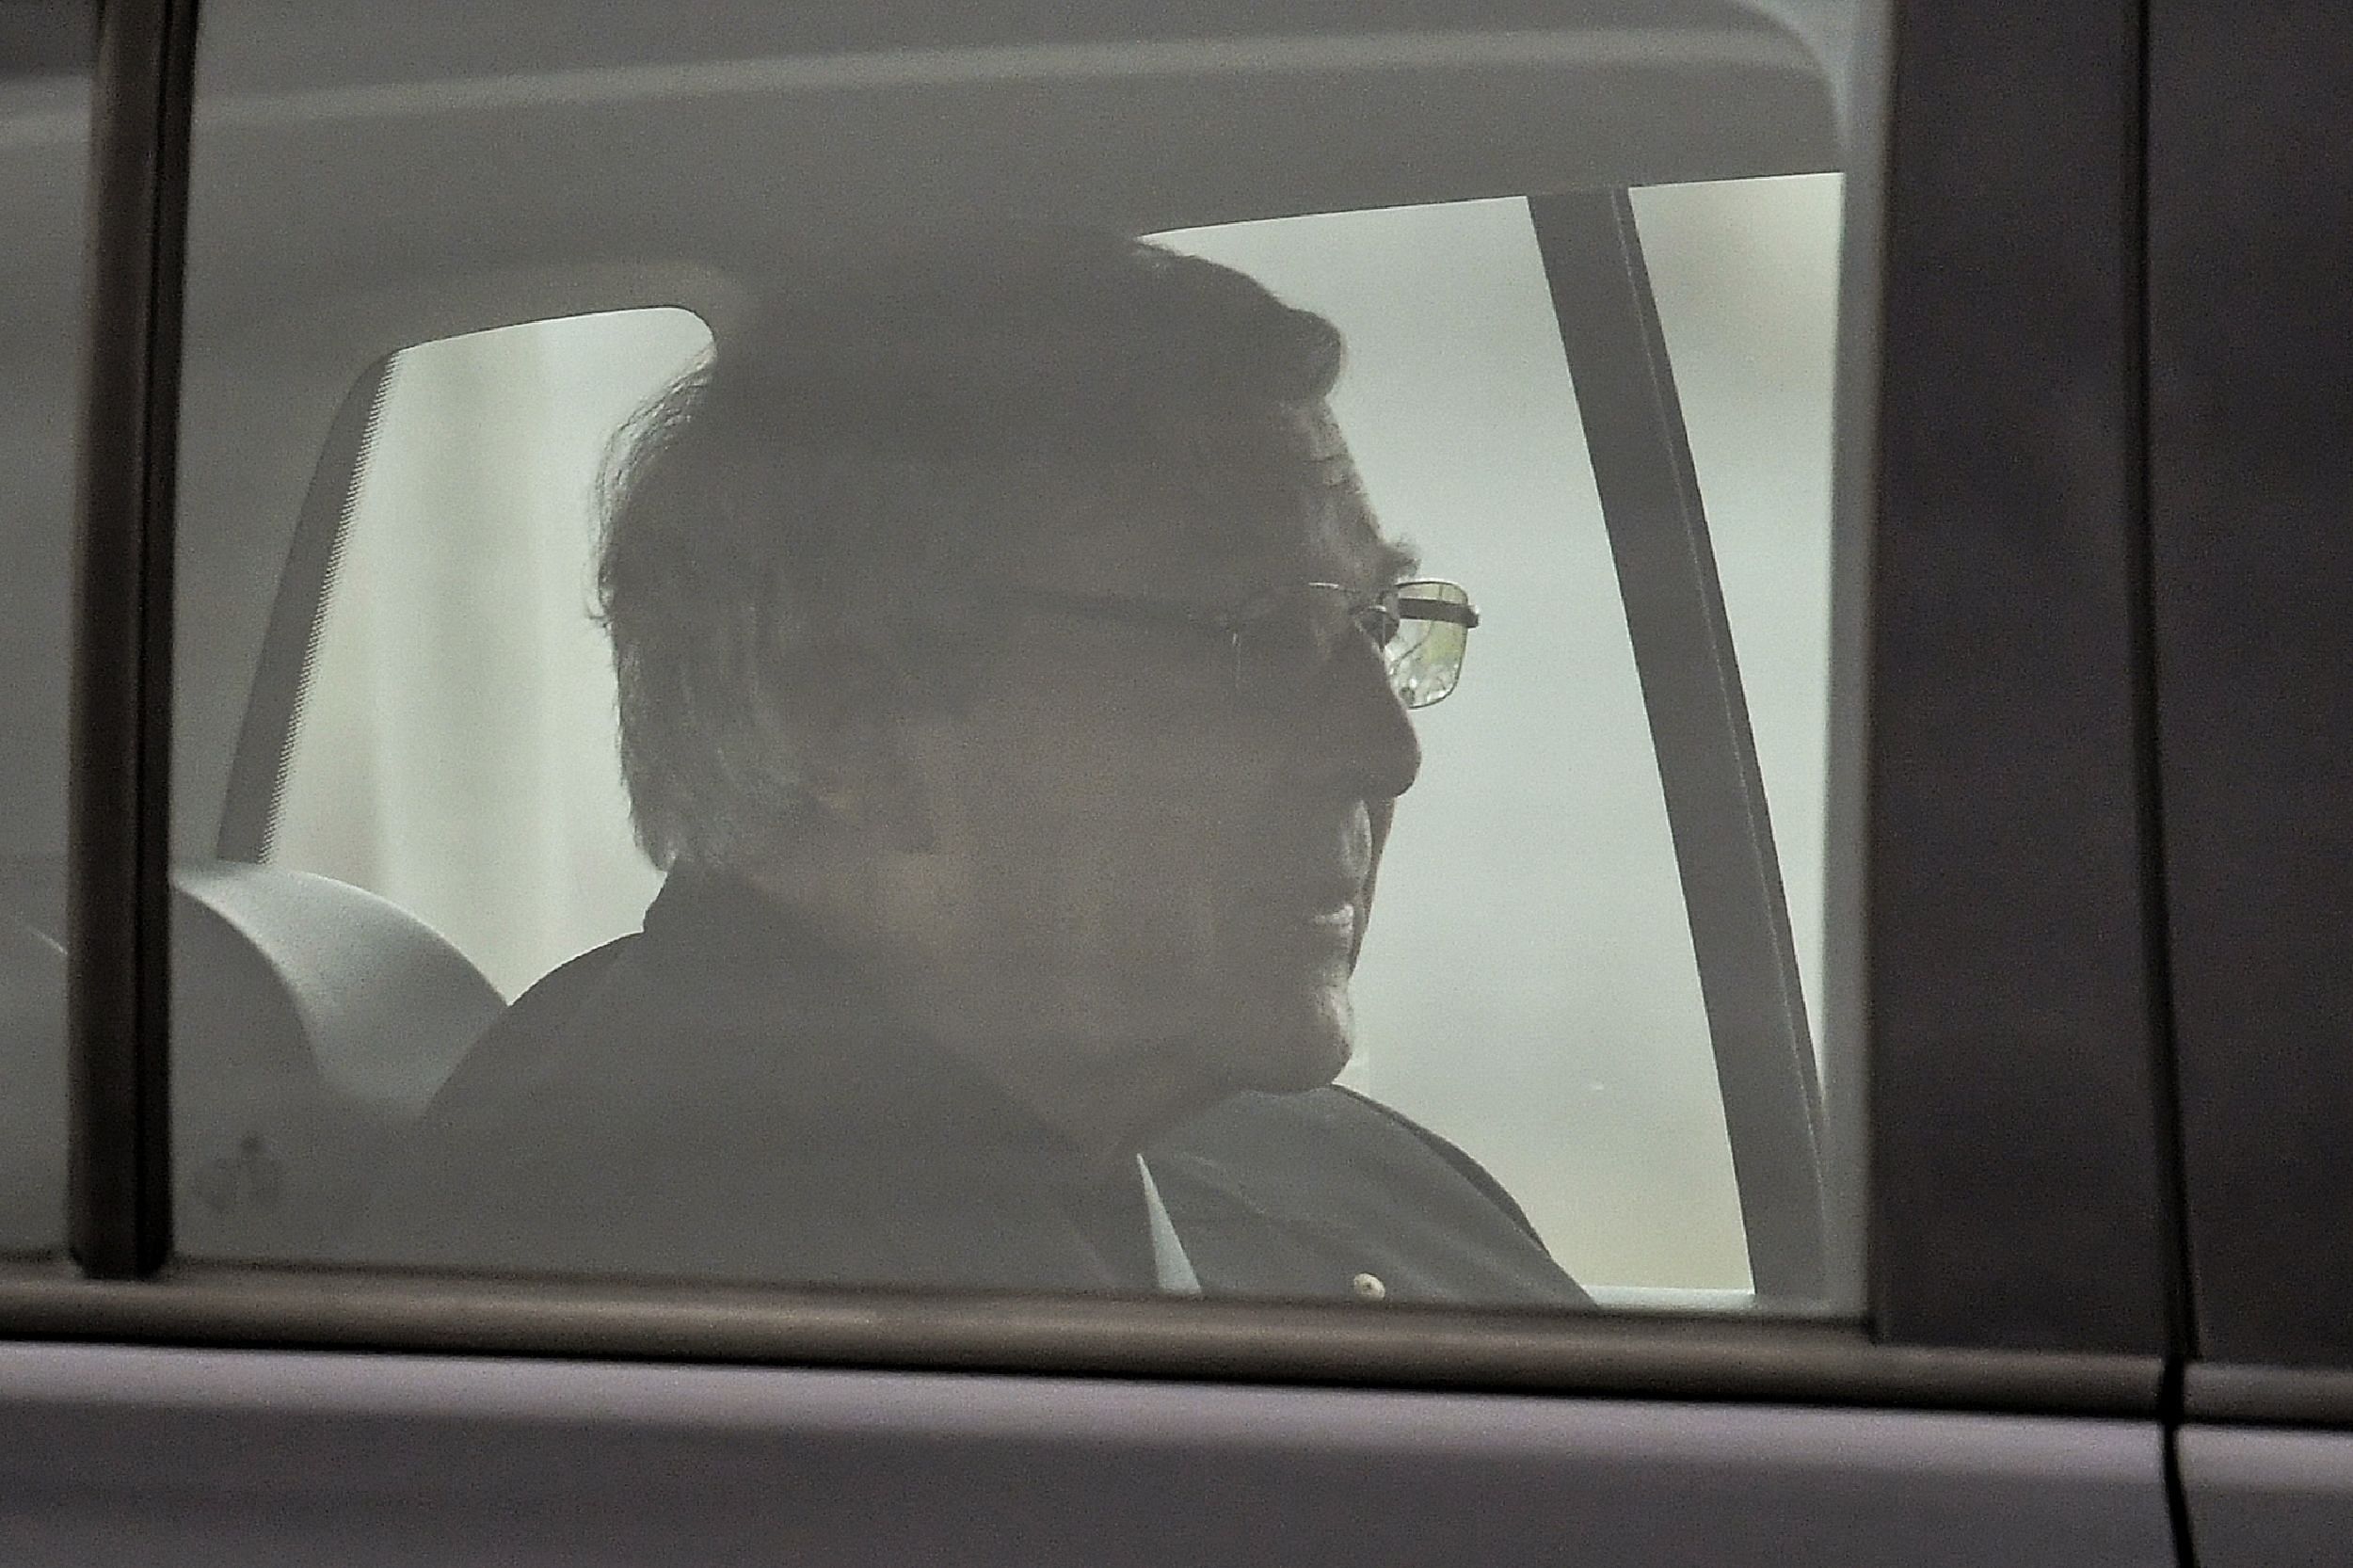 Australian Cardinal George Pell leaves after being released from Barwon Prison near Anakie, some 70 kilometres west of Melbourne, on April 7, 2020. (Credit: AFP Photo)